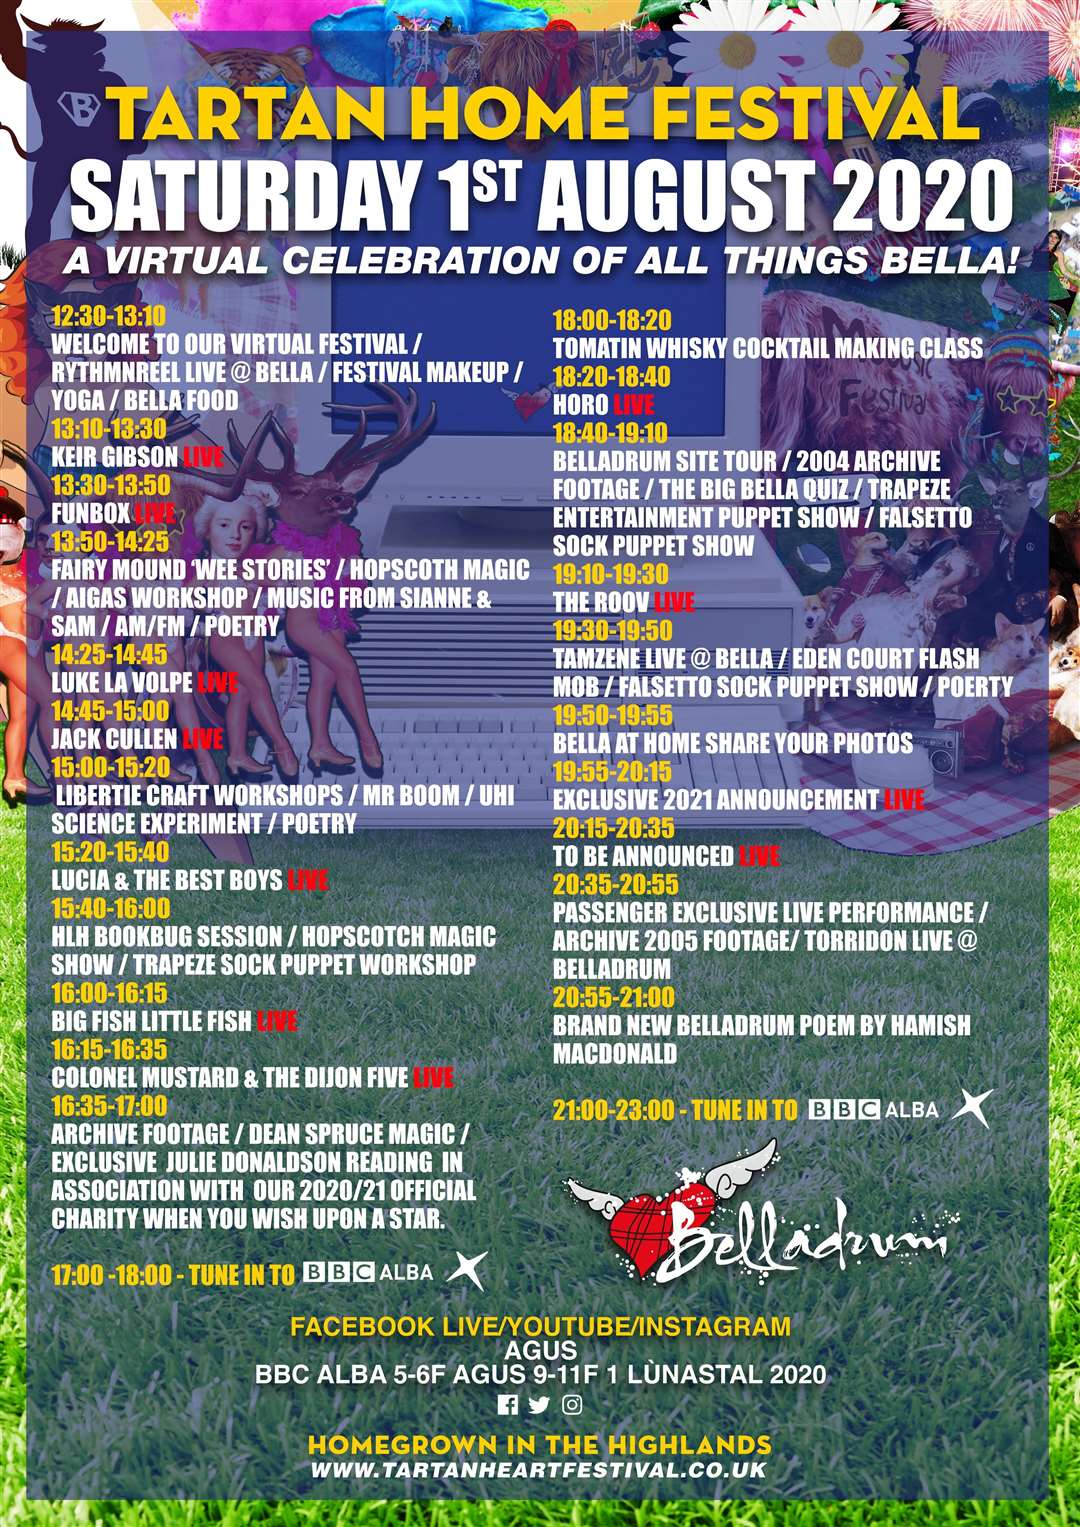 The full line-up for the whole Belladrum day!